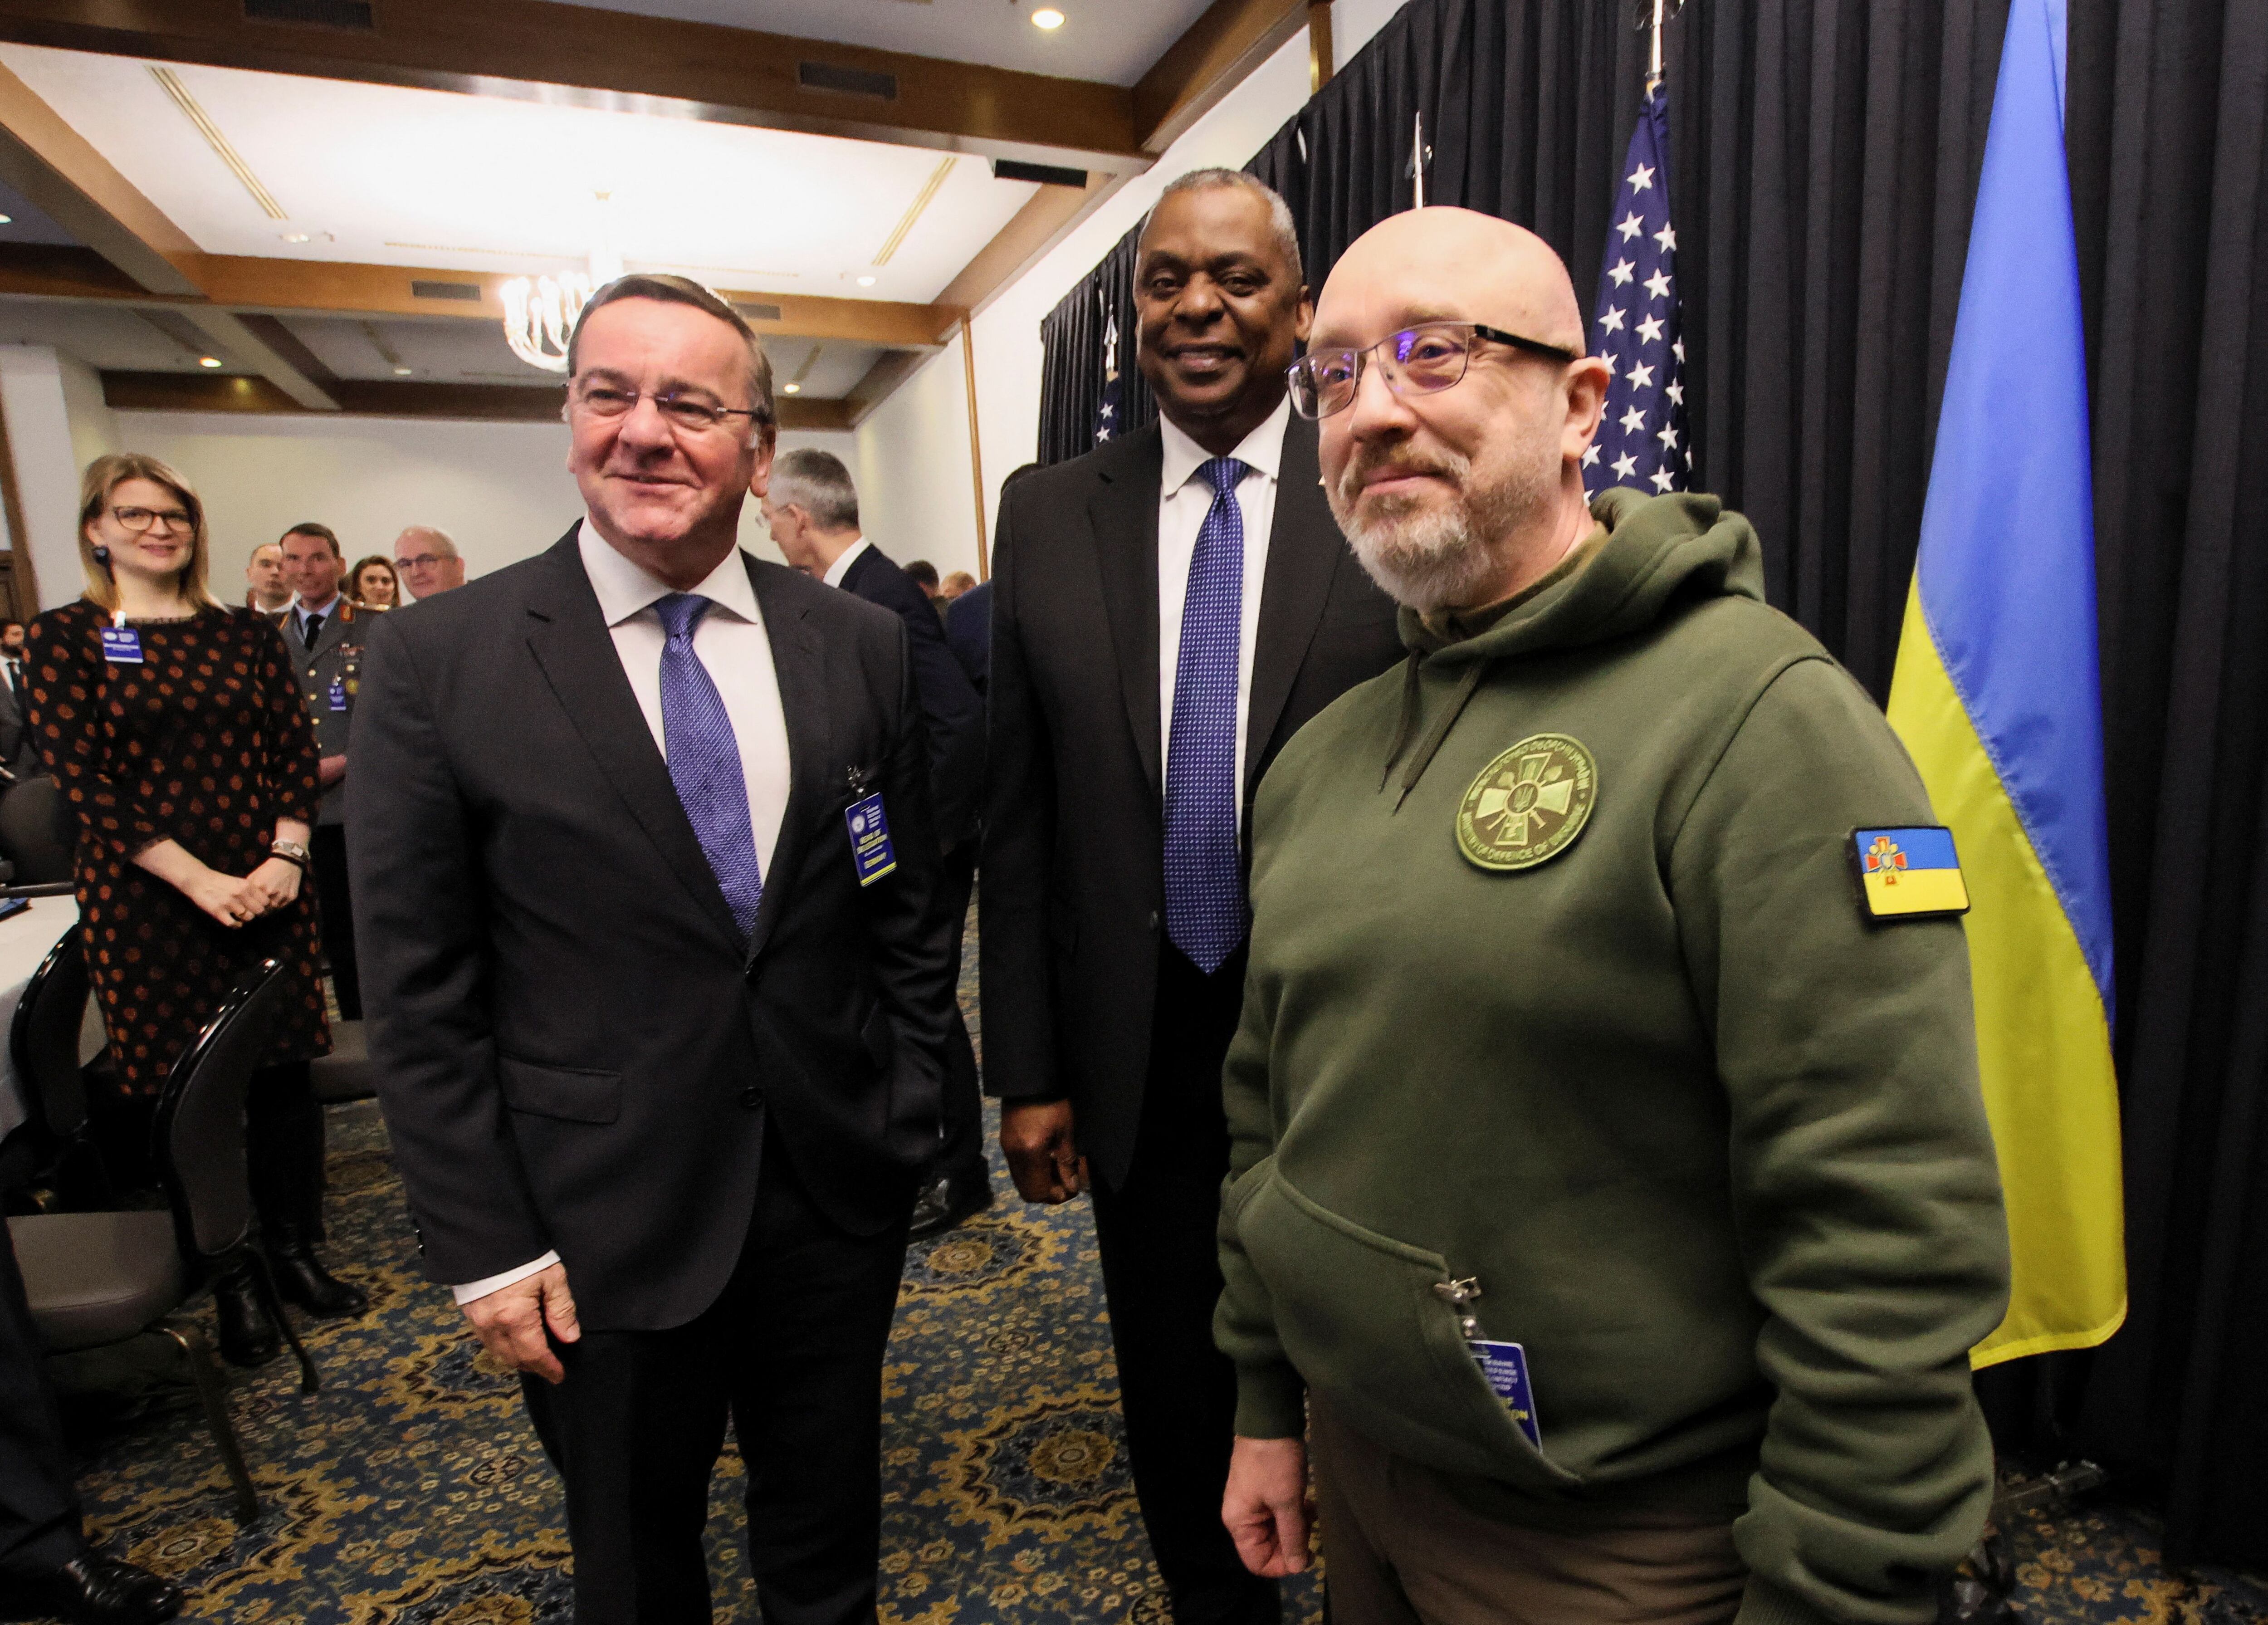 German Defence Minister Boris Pistorius meets with his U.S. counterpart, Secretary of Defense Lloyd Austin and Ukraine's Defense Minister Oleksiy Reznikov to discuss how to help Ukraine defend itself, at Ramstein Air Base, Germany, January 20, 2023. REUTERS/Wolfgang Rattay